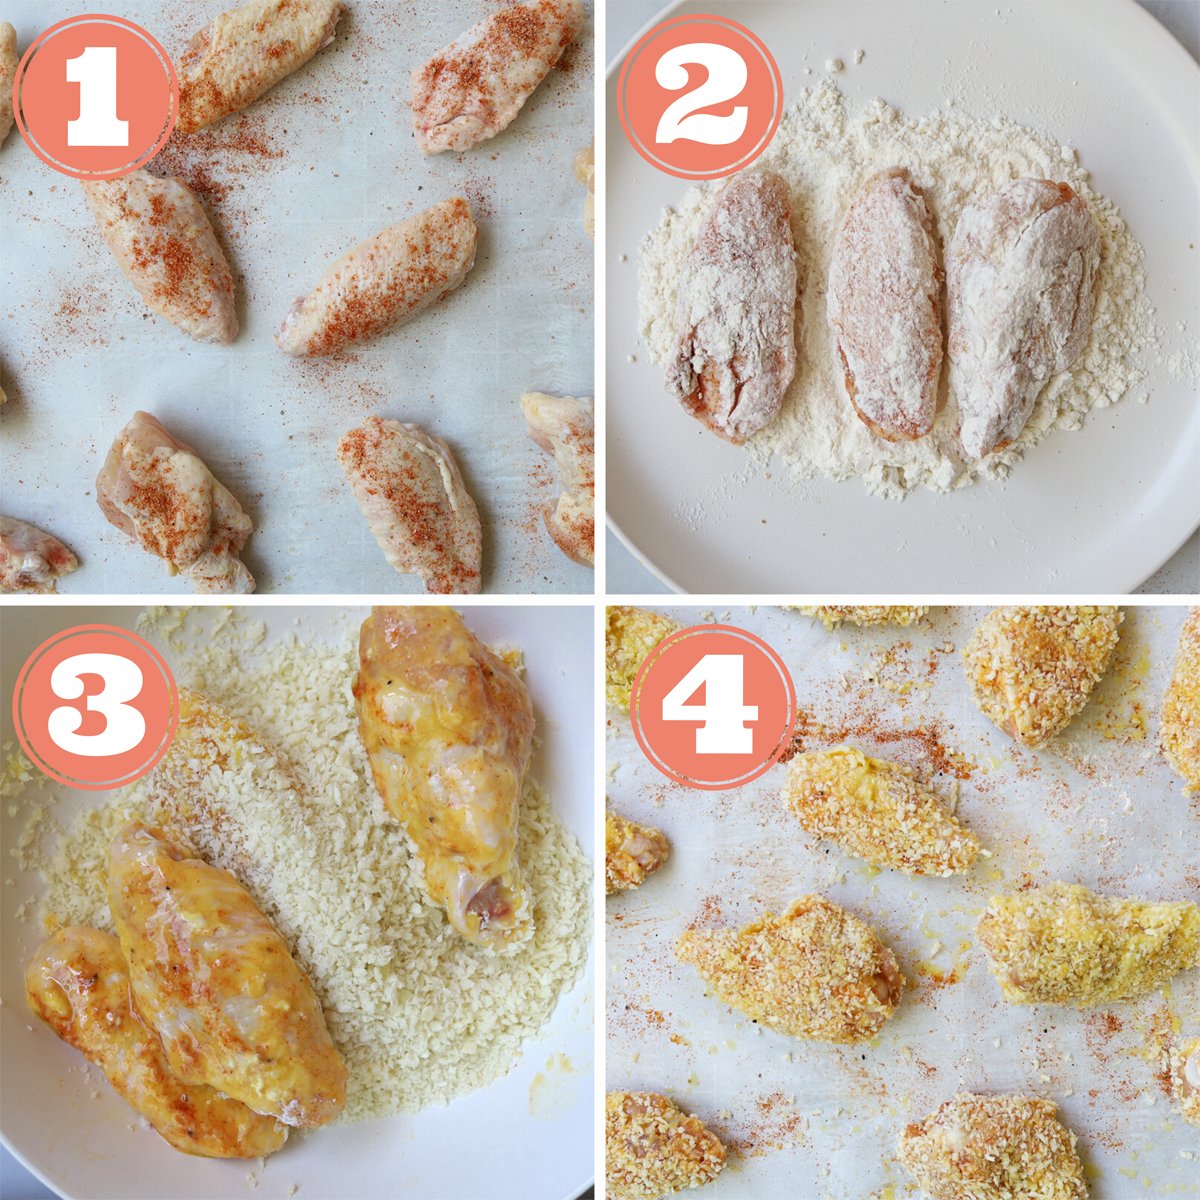 Steps to make chicken wings